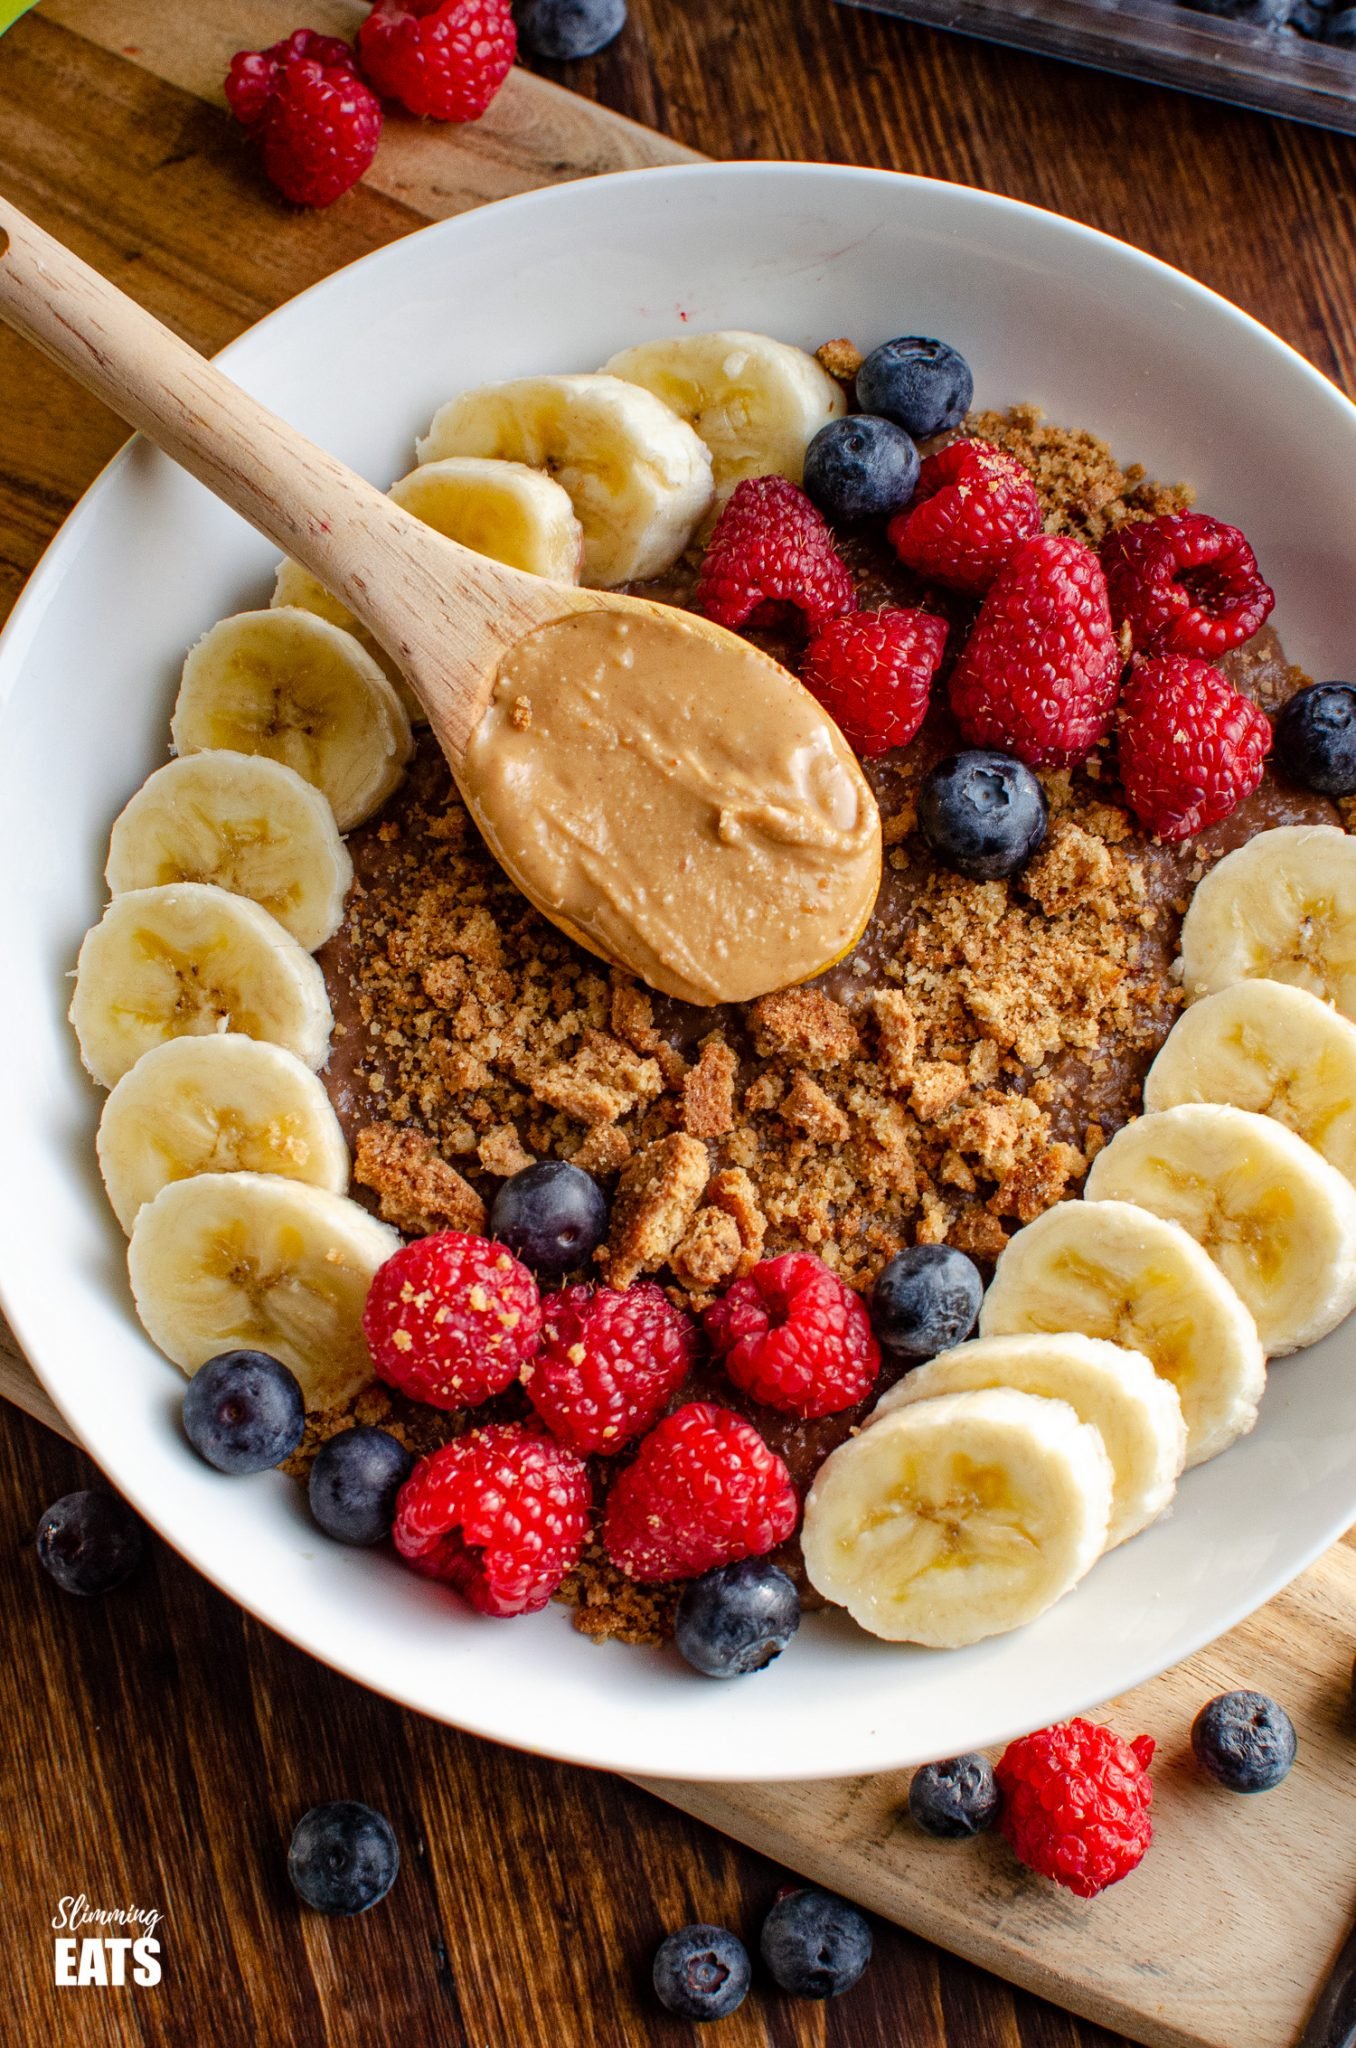 Chocolate Peanut Butter Oatmeal in white bowl with wooden spoon of peanut butter, slices of banana, raspberries, blueberries and a mini crumbled cookie